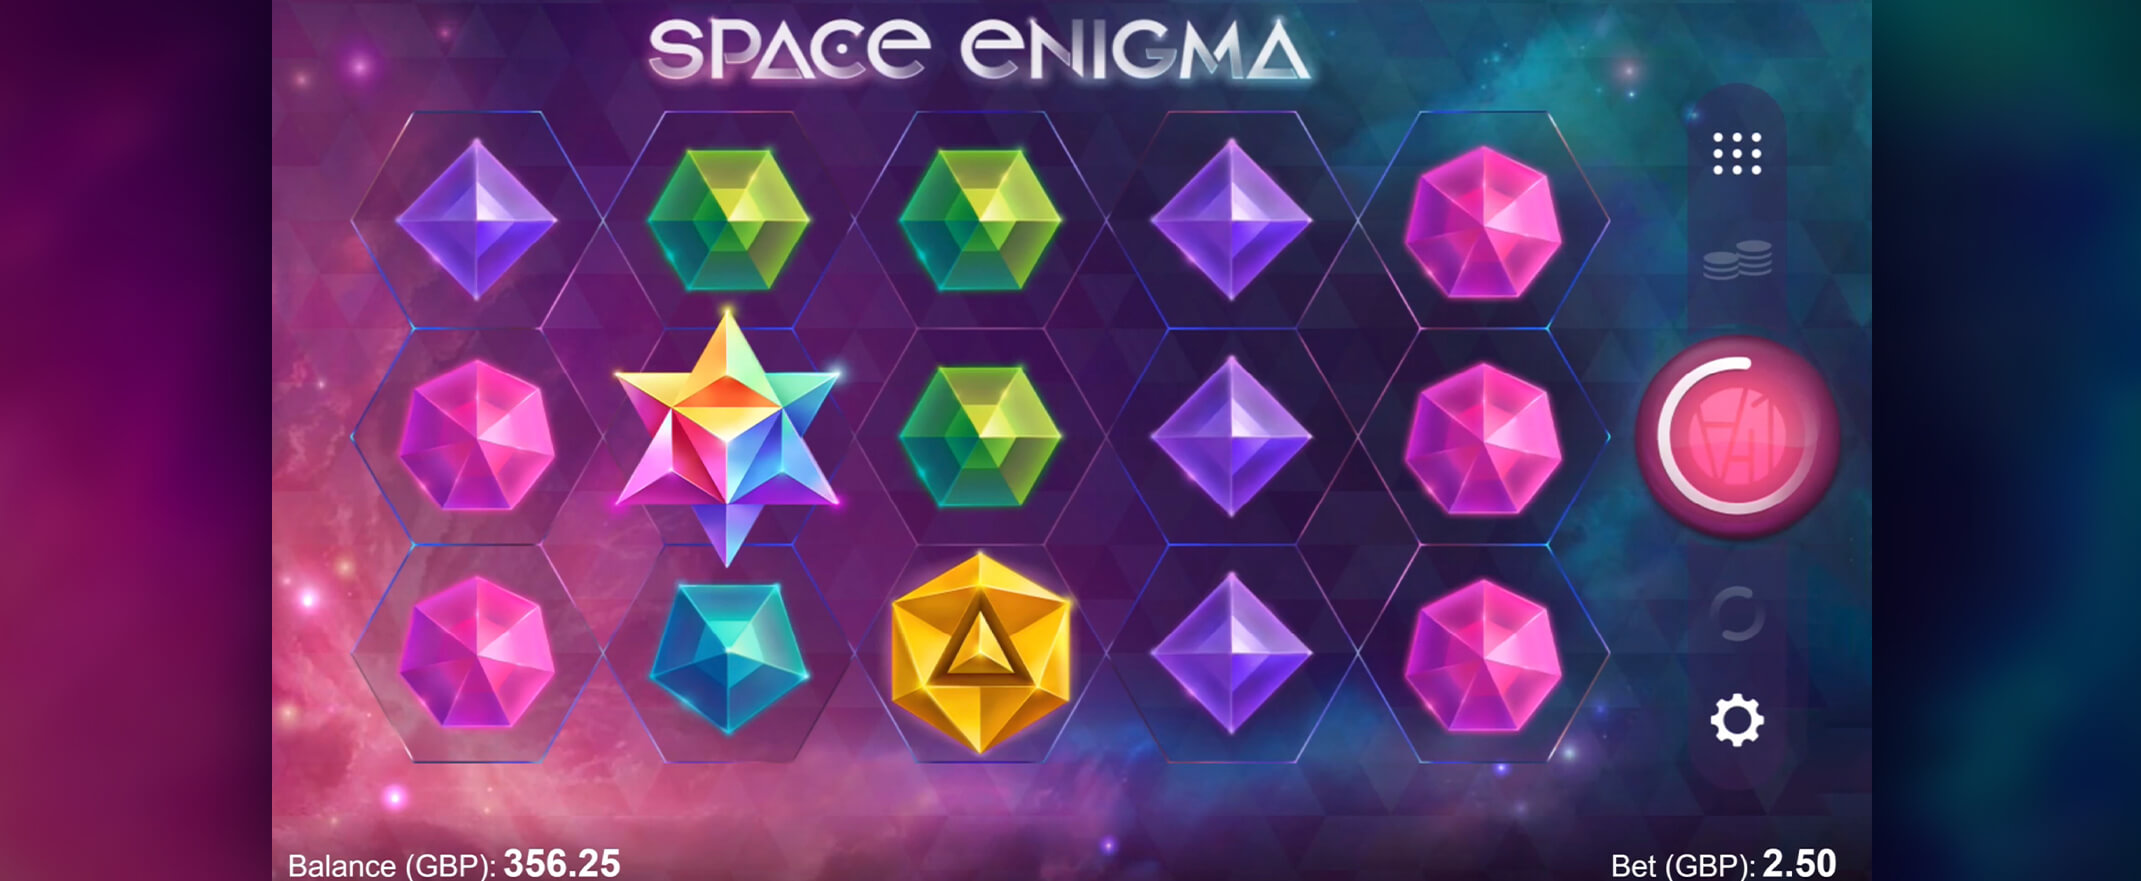 Space Enigma Slot - an image with the reels